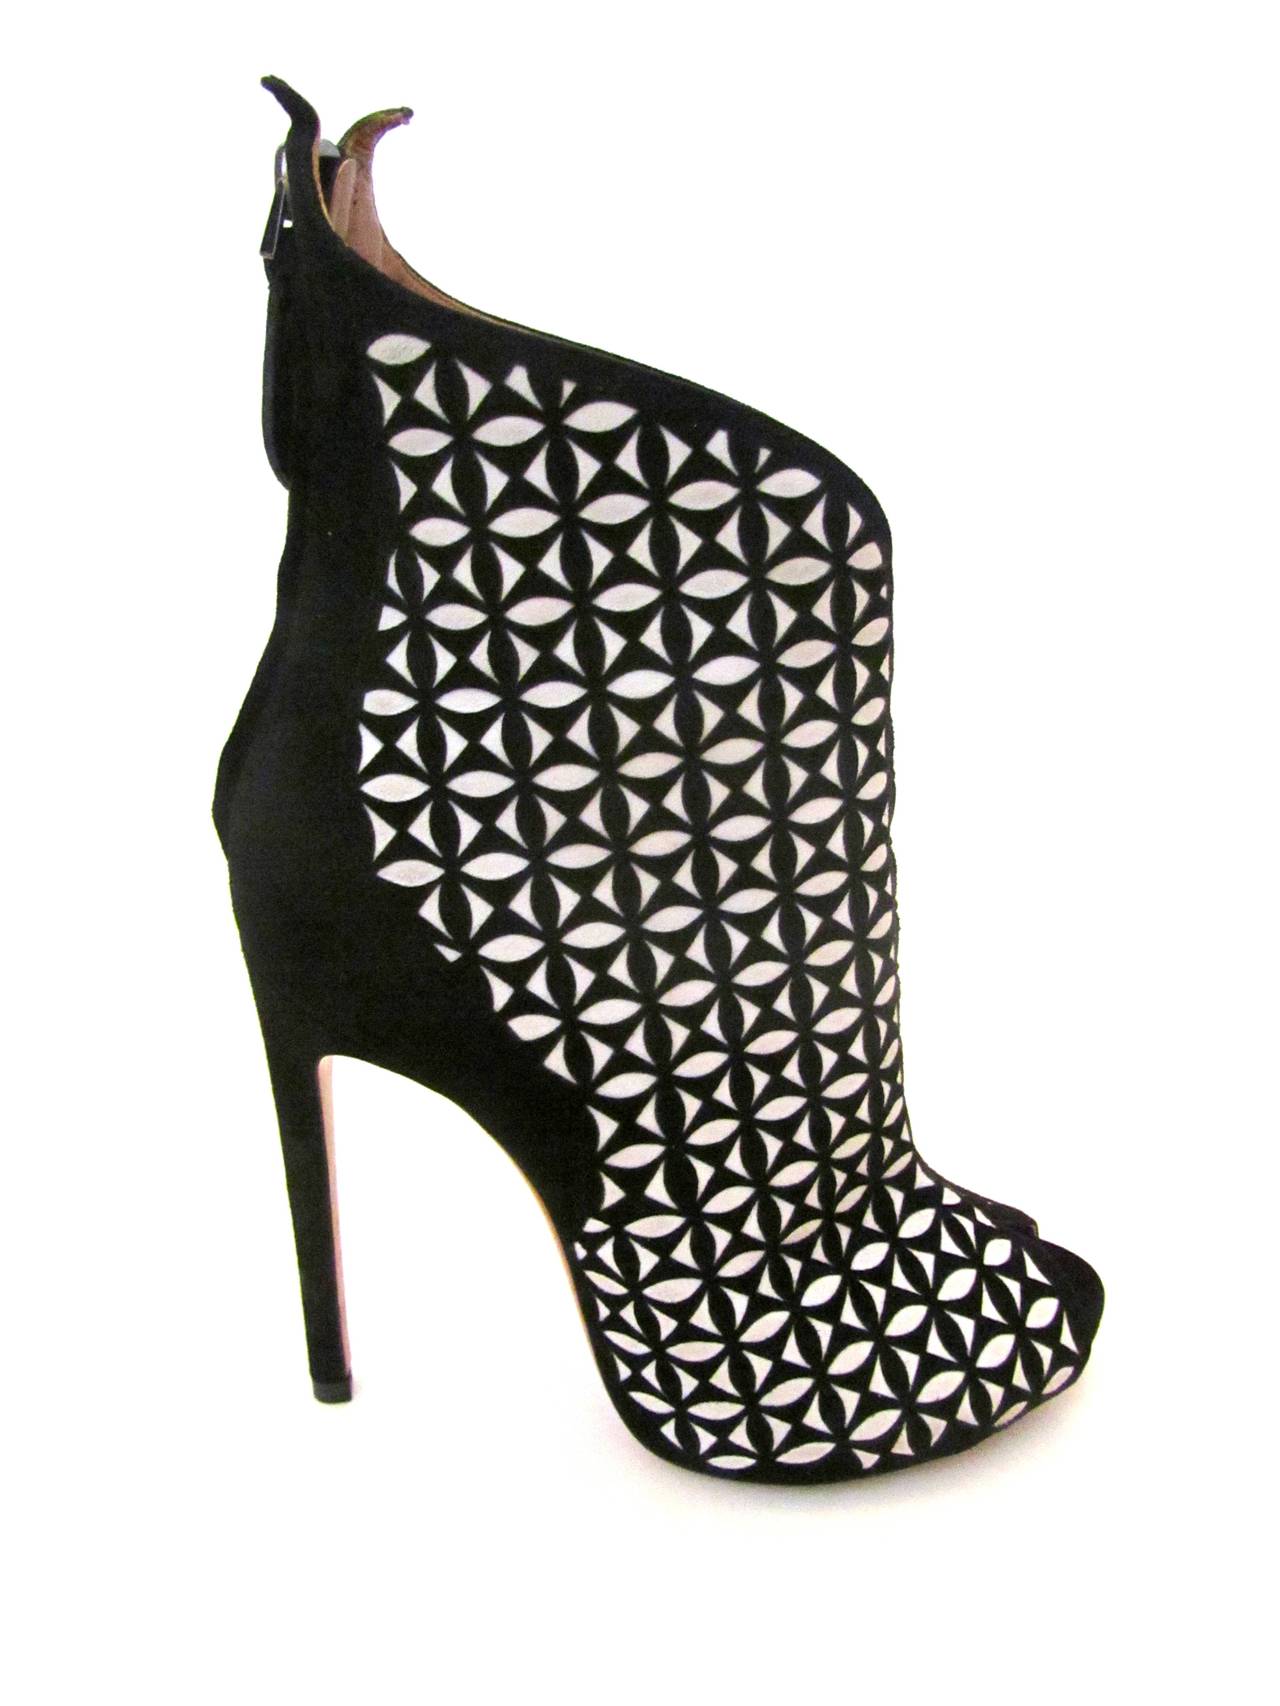 New Alaia Open Toed High Heel Boots - 37 - Black and White Suede For Sale 2